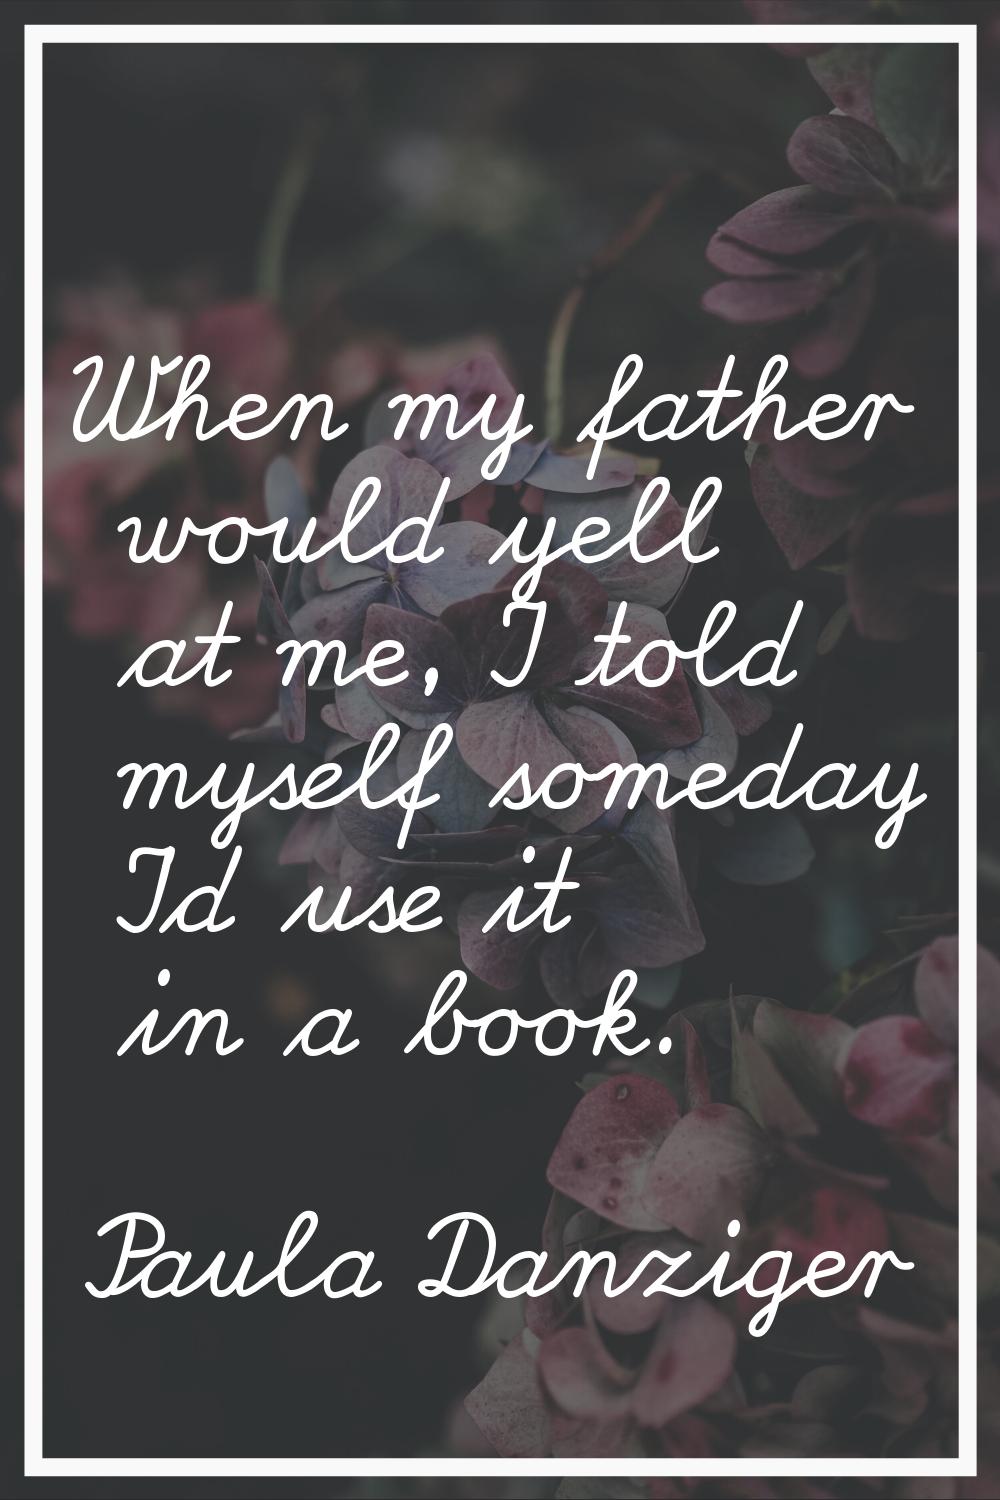 When my father would yell at me, I told myself someday I'd use it in a book.